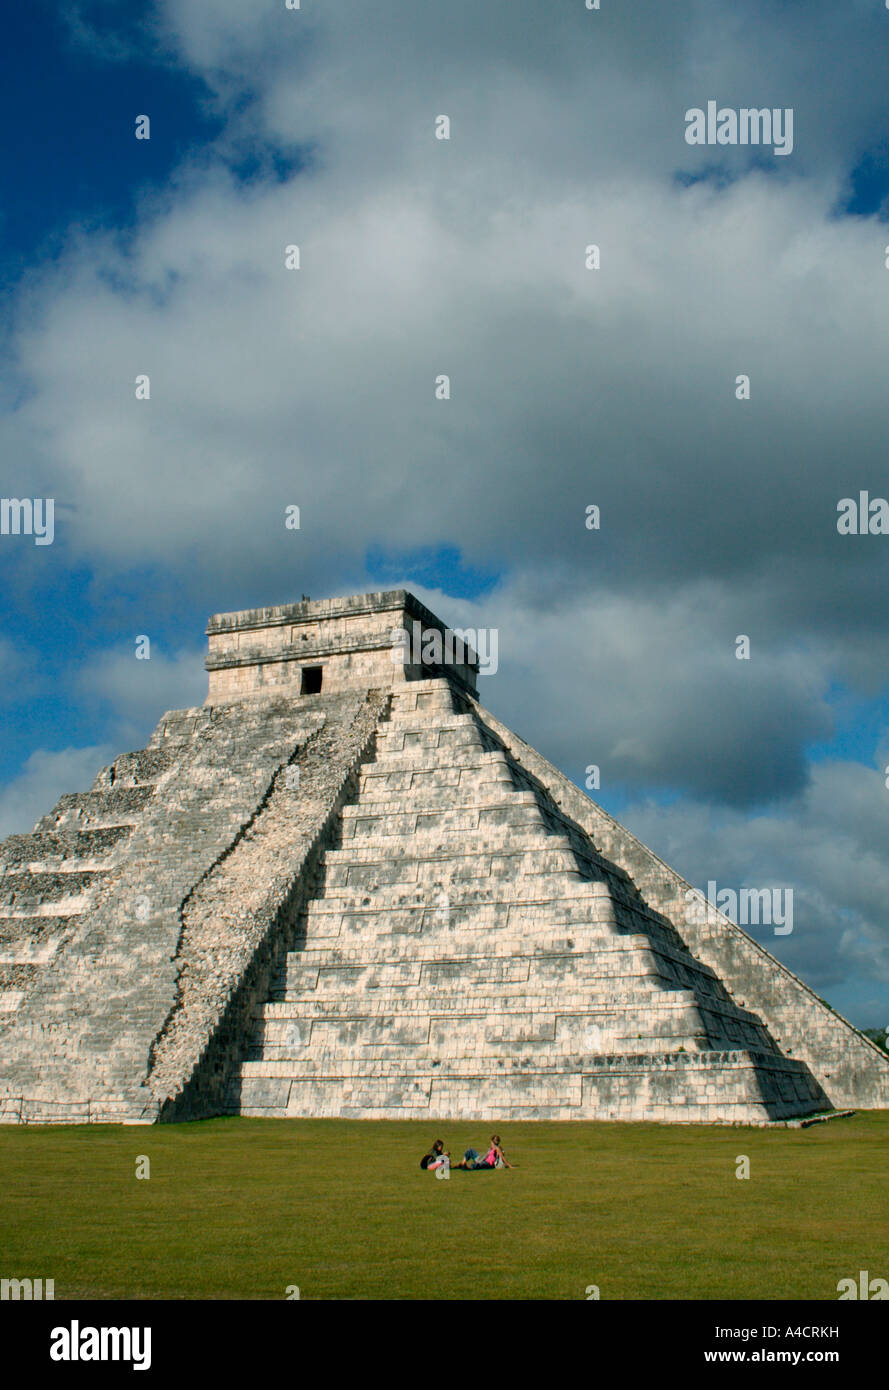 Temple of Kukulcan, highest structure built by the Yucatan Maya. Four stairways lead to the top, one open to the public. Stock Photo